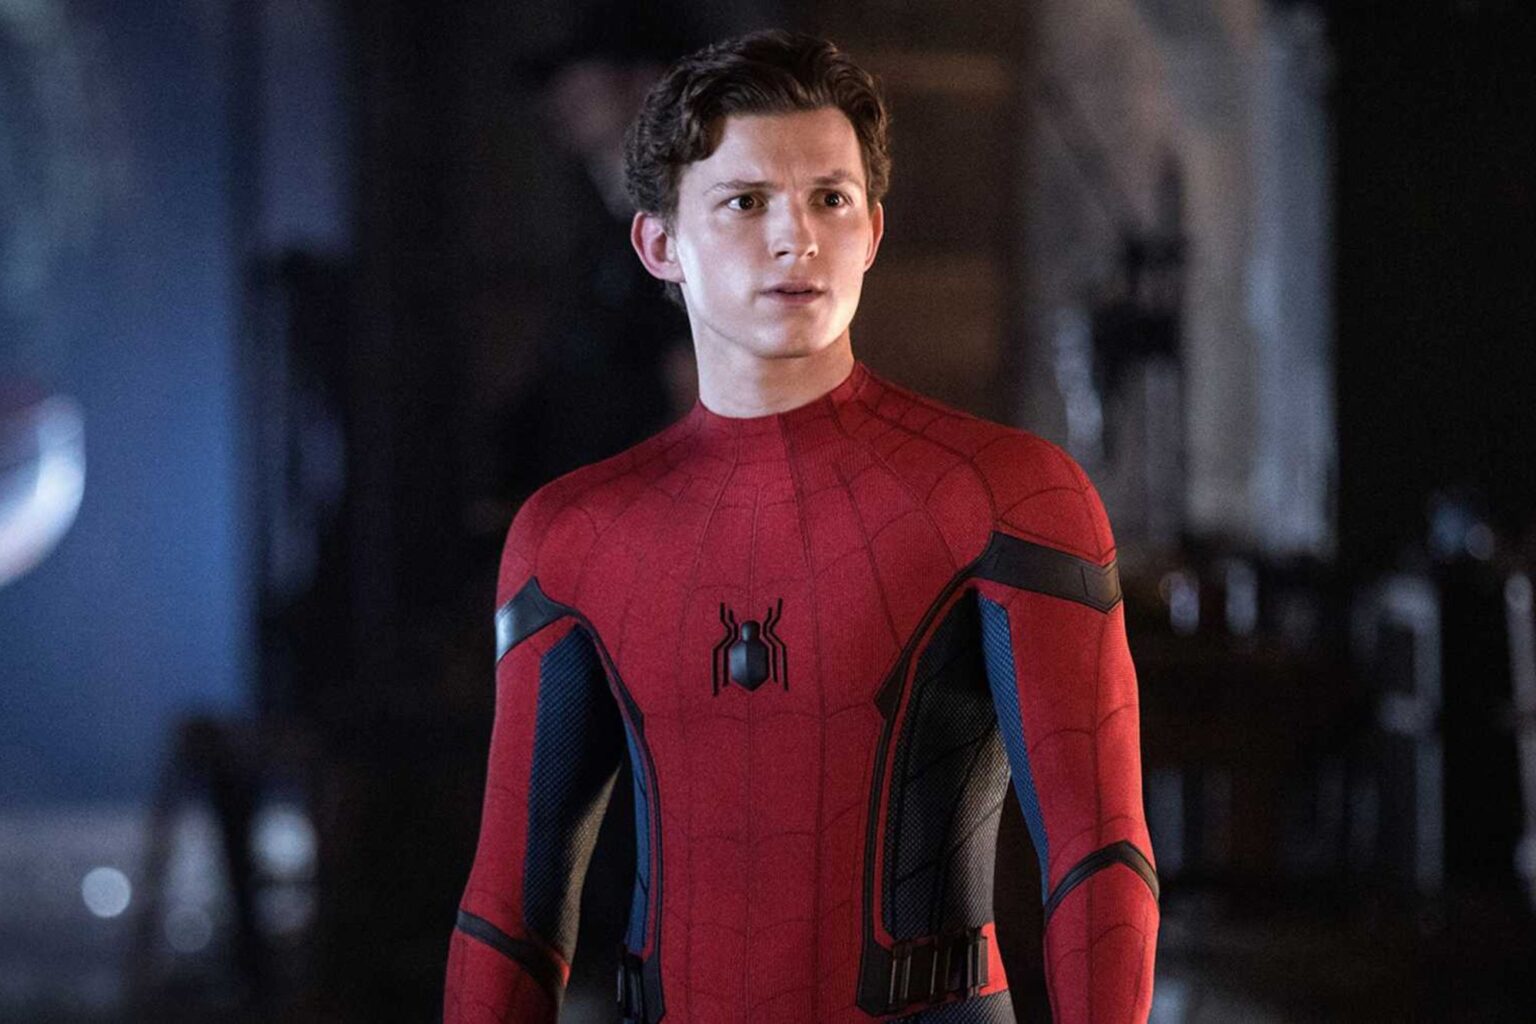 Spider Man is all over the news cycle. Find out how to watch 'Far from Home' ahead of the next Spidey release in 2021.